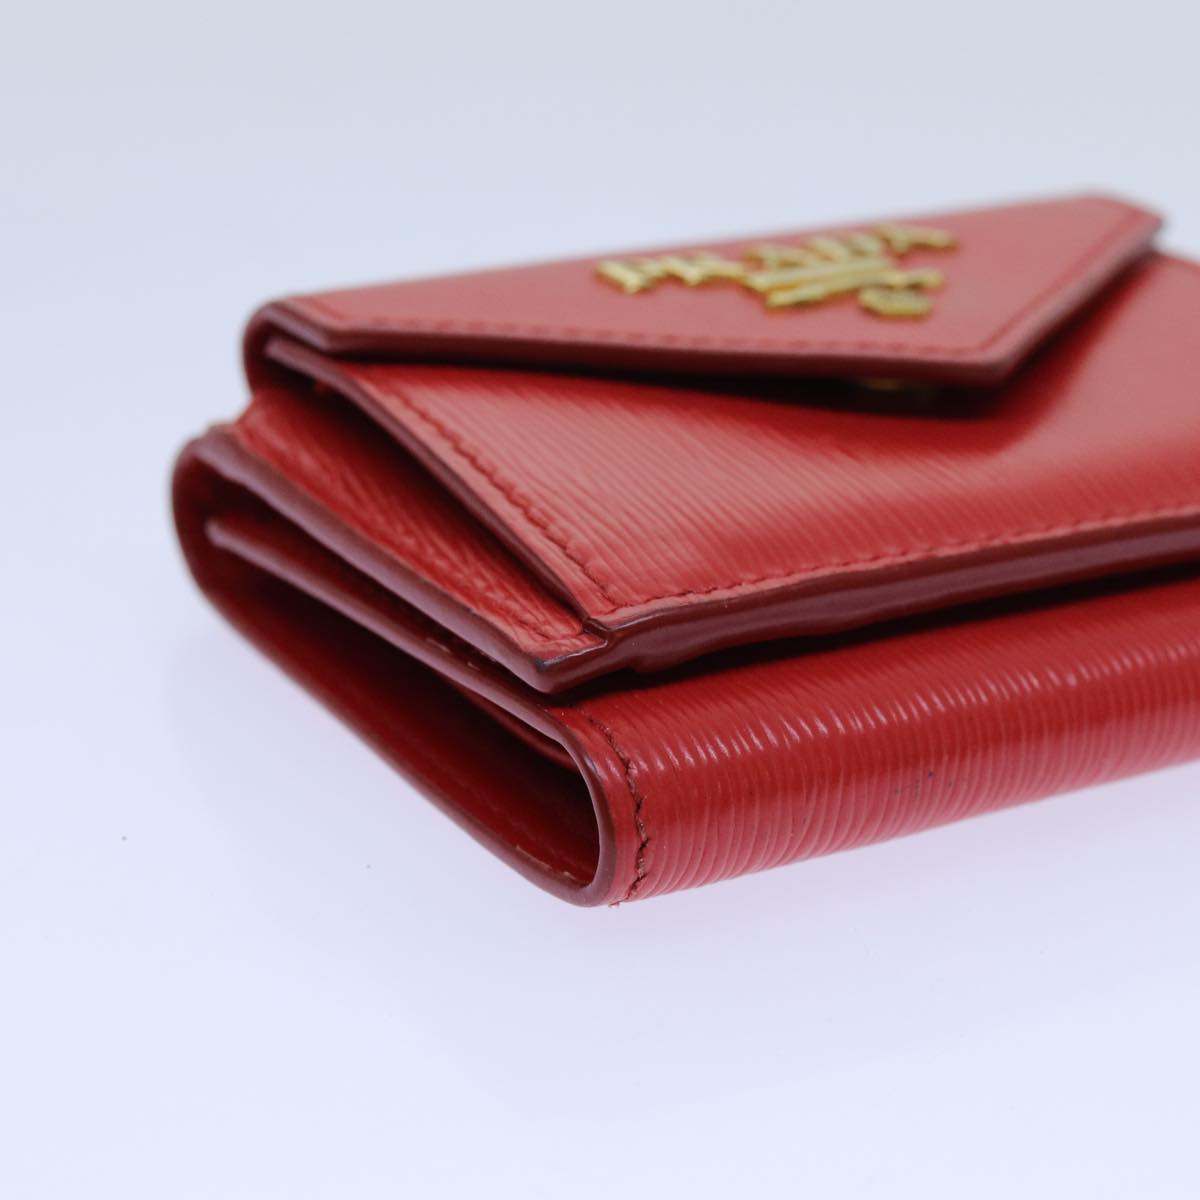 PRADA Wallet Safiano leather Red Auth 71619